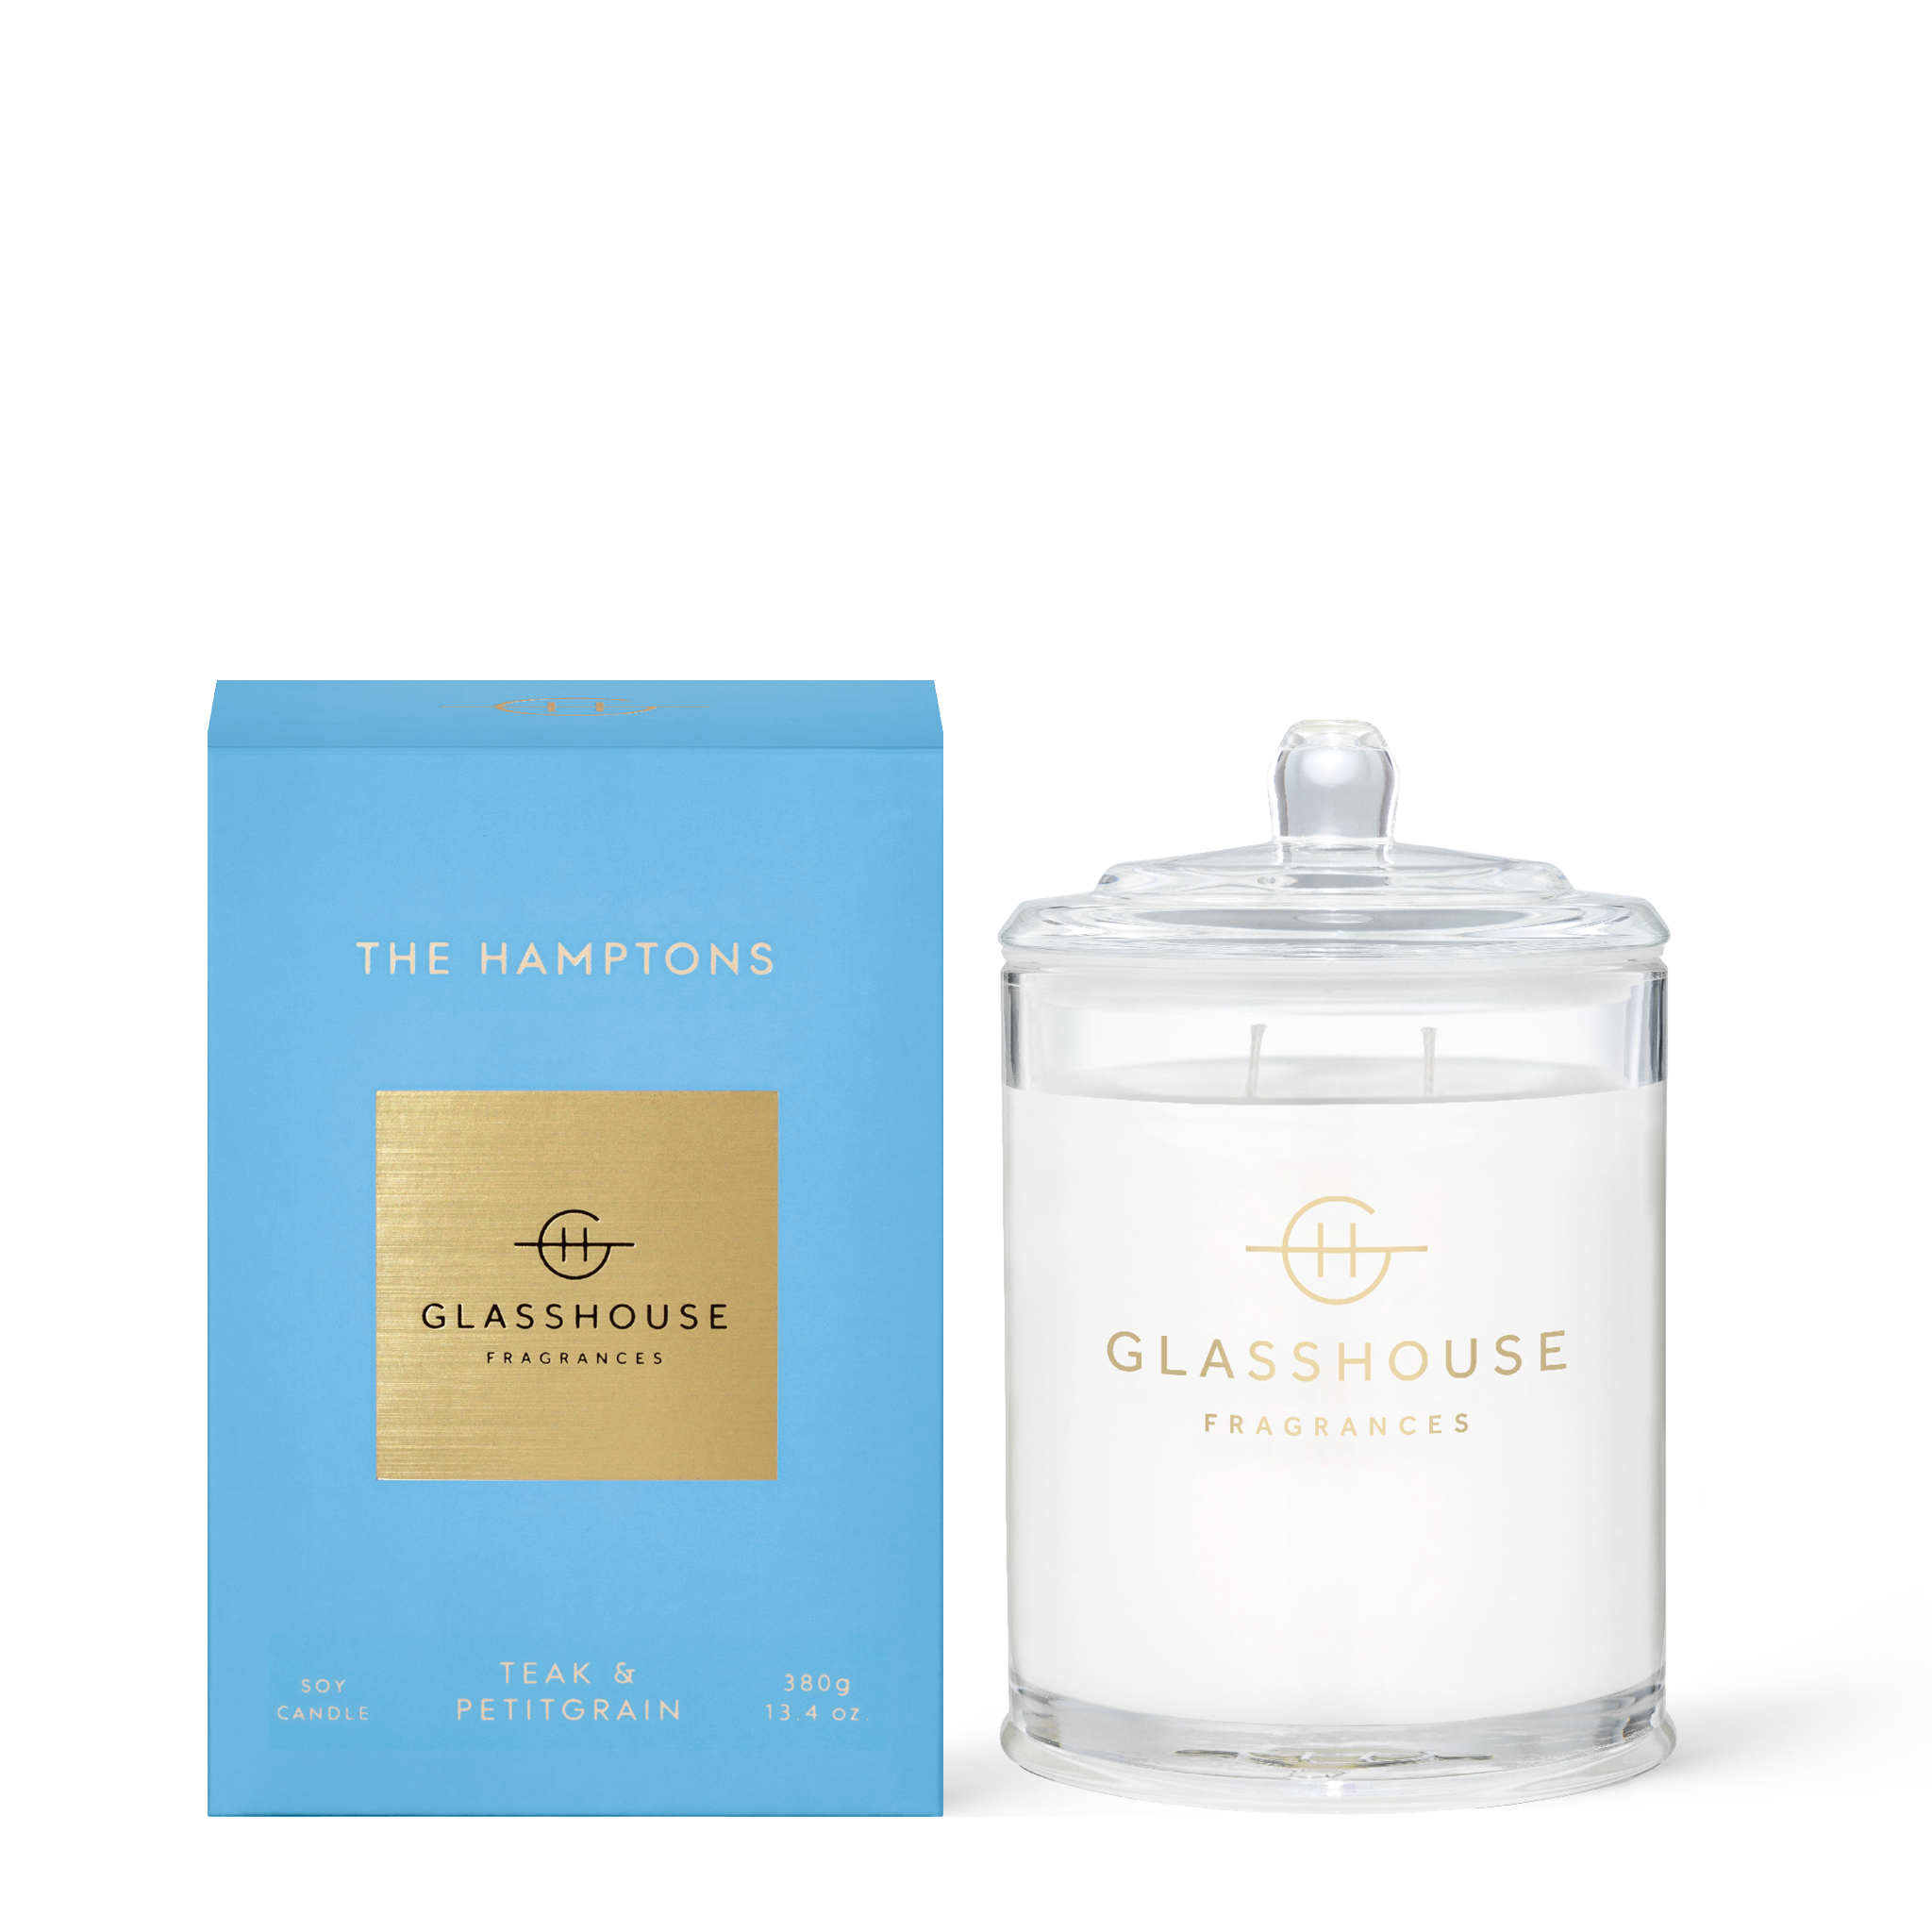 Glasshouse Fragrances The Hamptons Teak and Petitgrain 380g Soy Candle with box